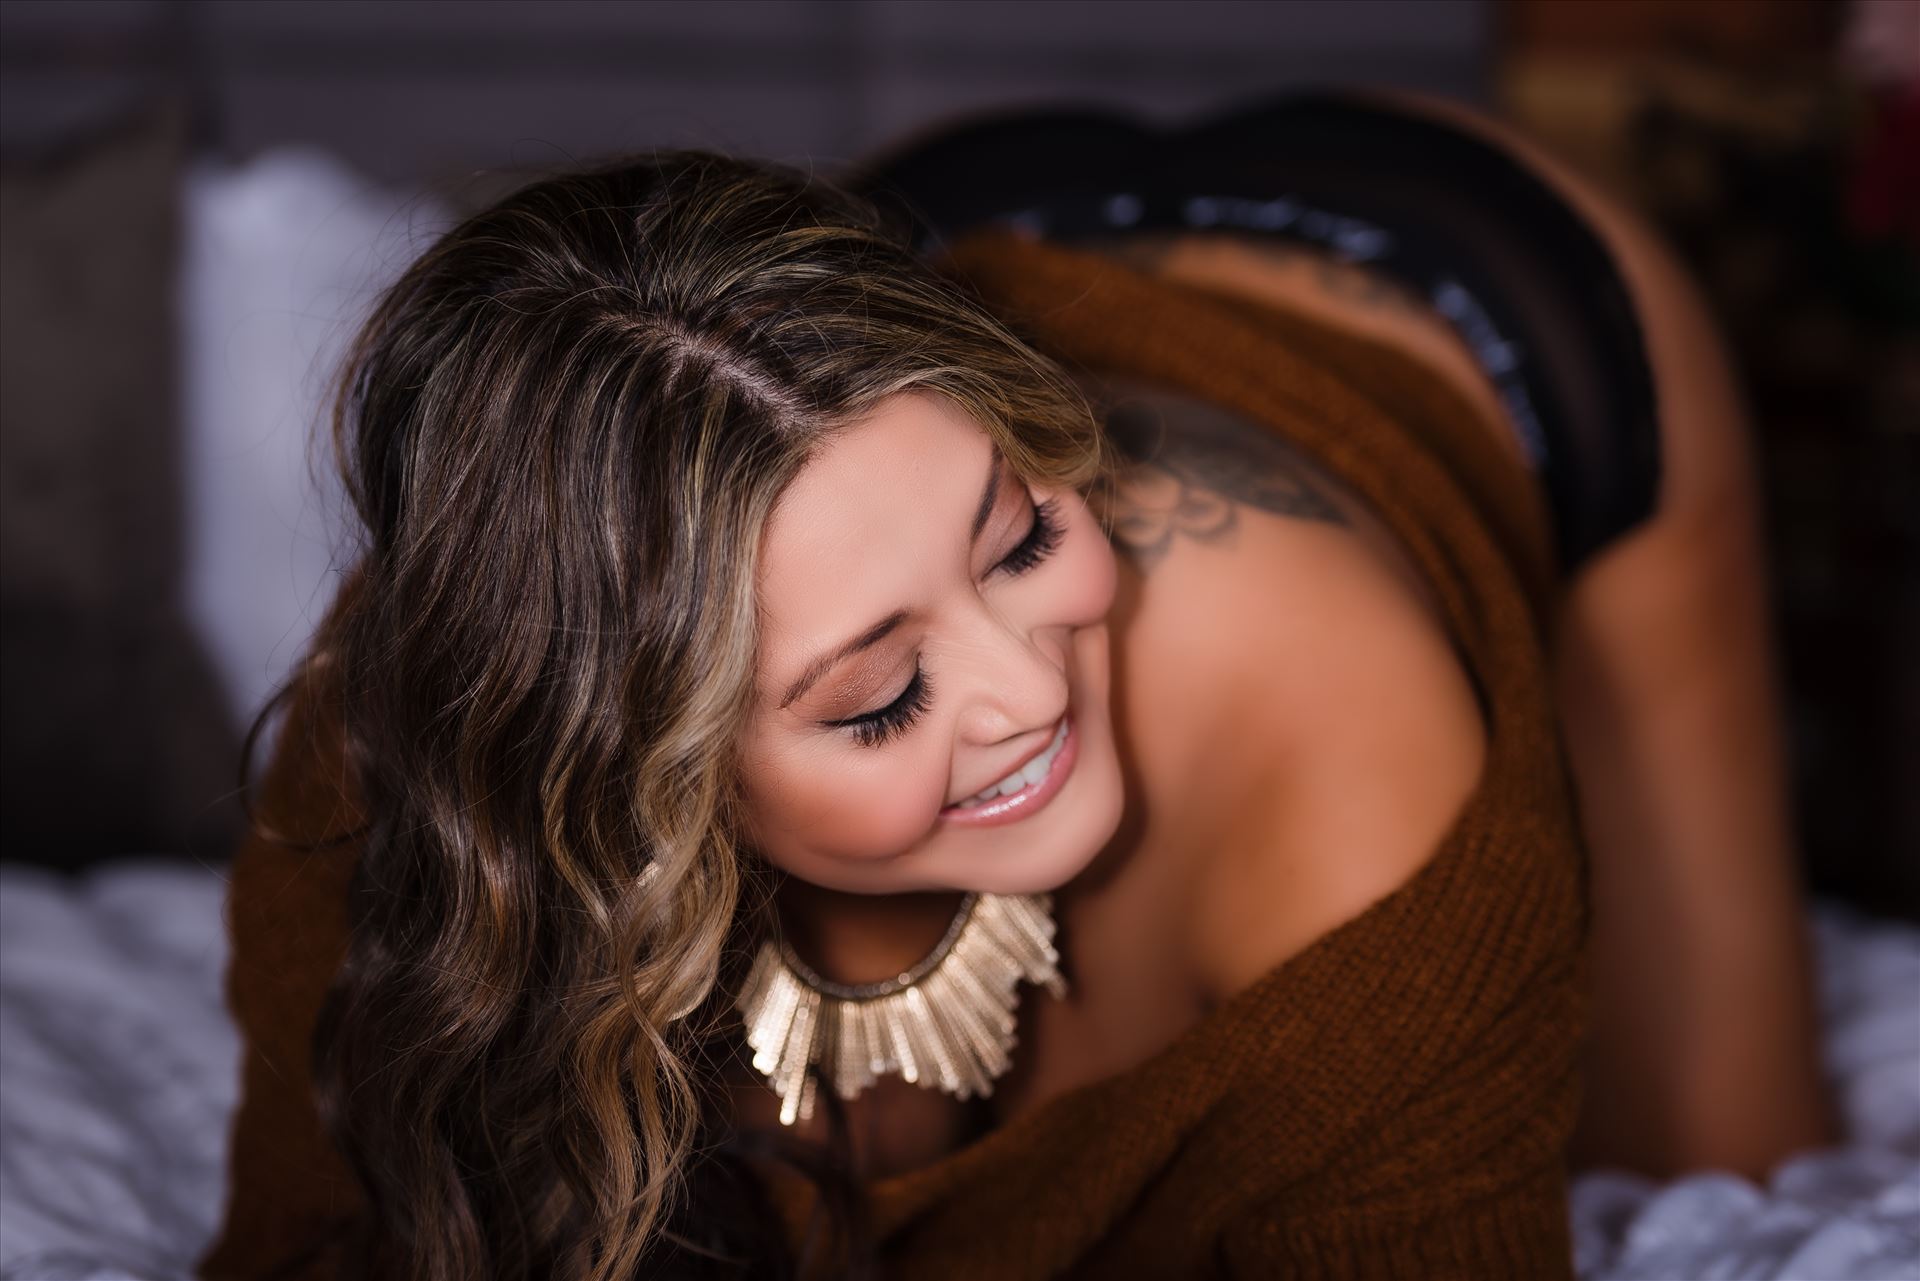 Port NW-9437.JPGBeachfront Boudoir by Mirror's Edge Photography is a Boutique Luxury Boudoir Photography Studio located just blocks from the beach in Oceano, California. My mission is to show as many women as possible how beautiful they truly are!